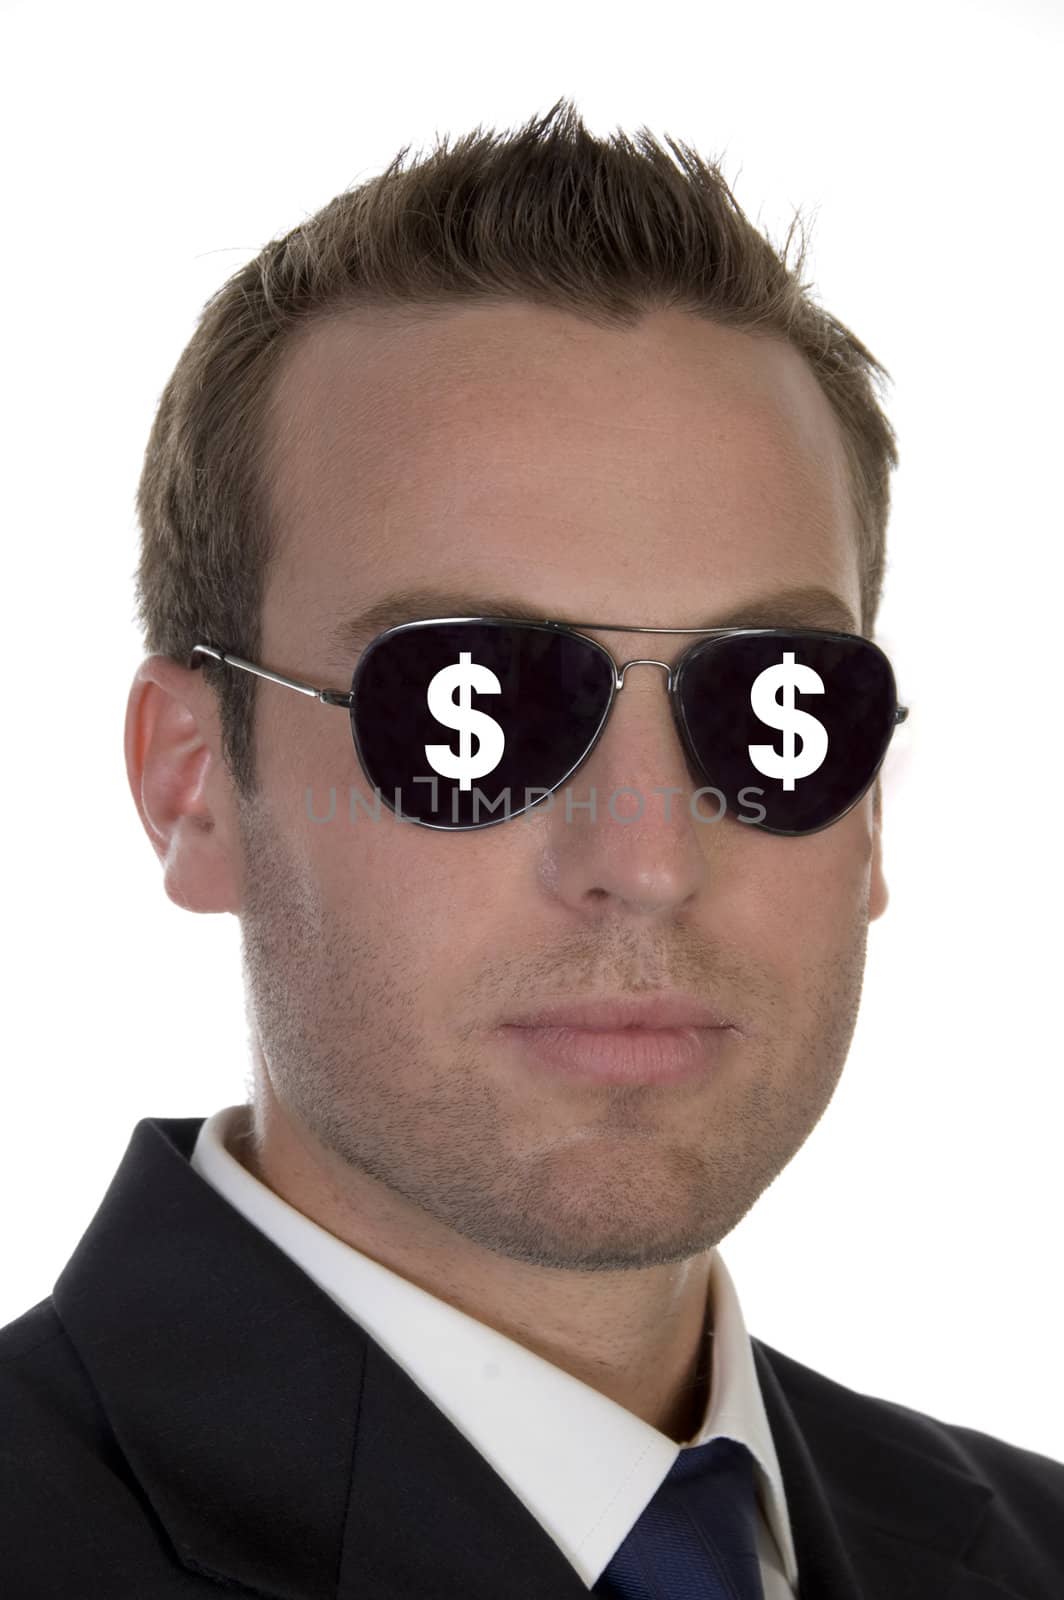 young american businessman with dollar signs on his sunglasses by imagerymajestic